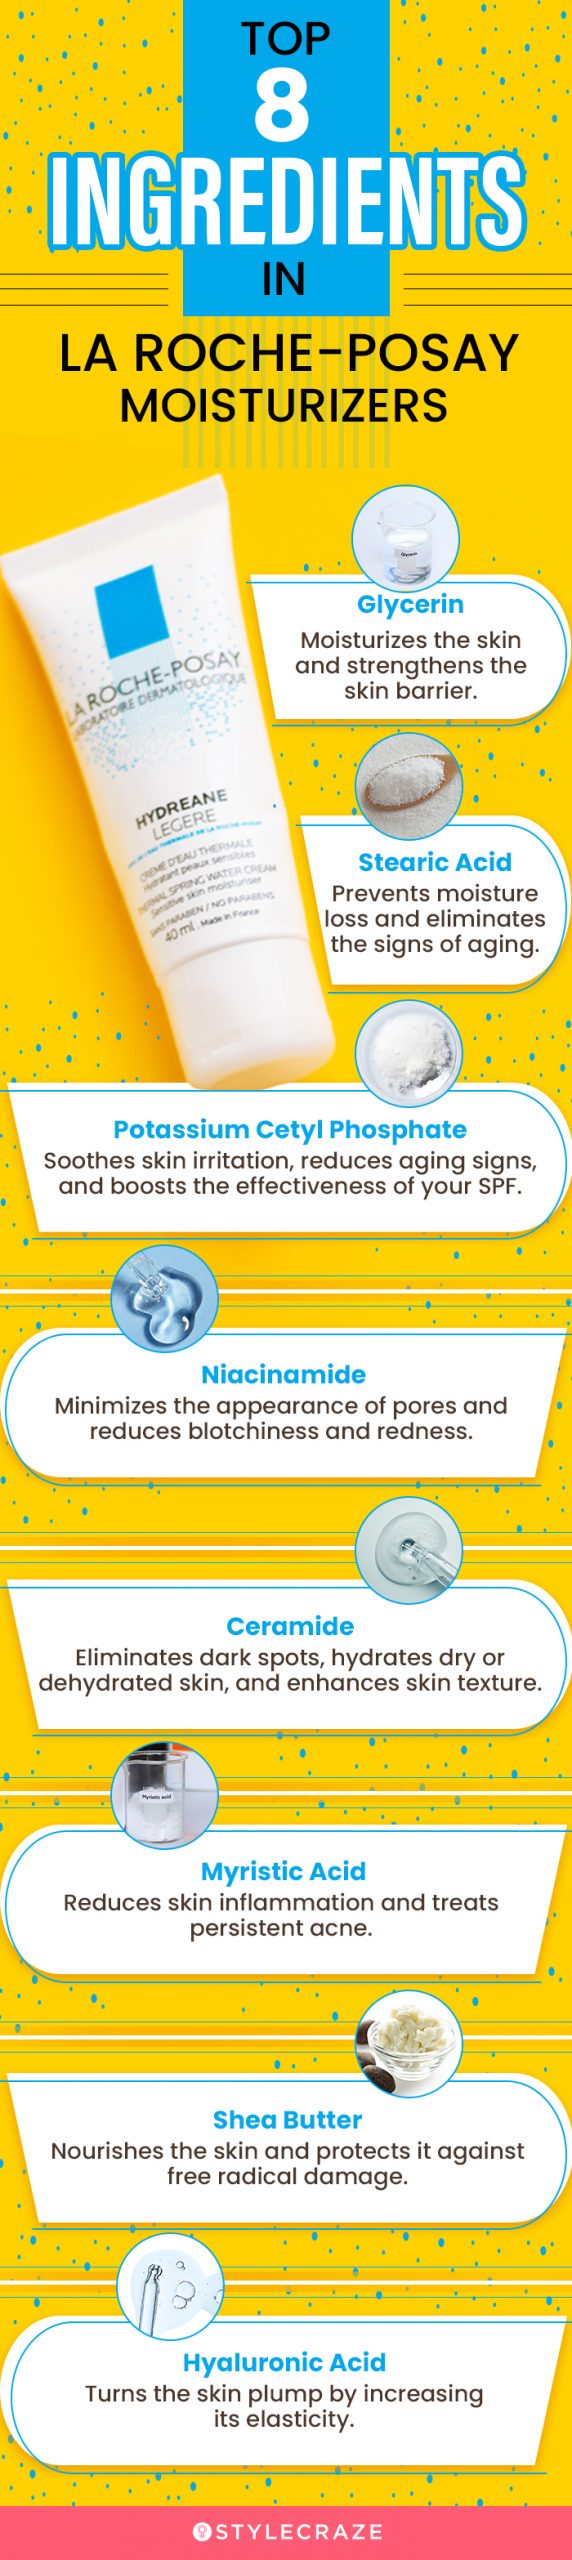 Top 8 Ingredients In La Roche-Posay Moisturizers (infographic)